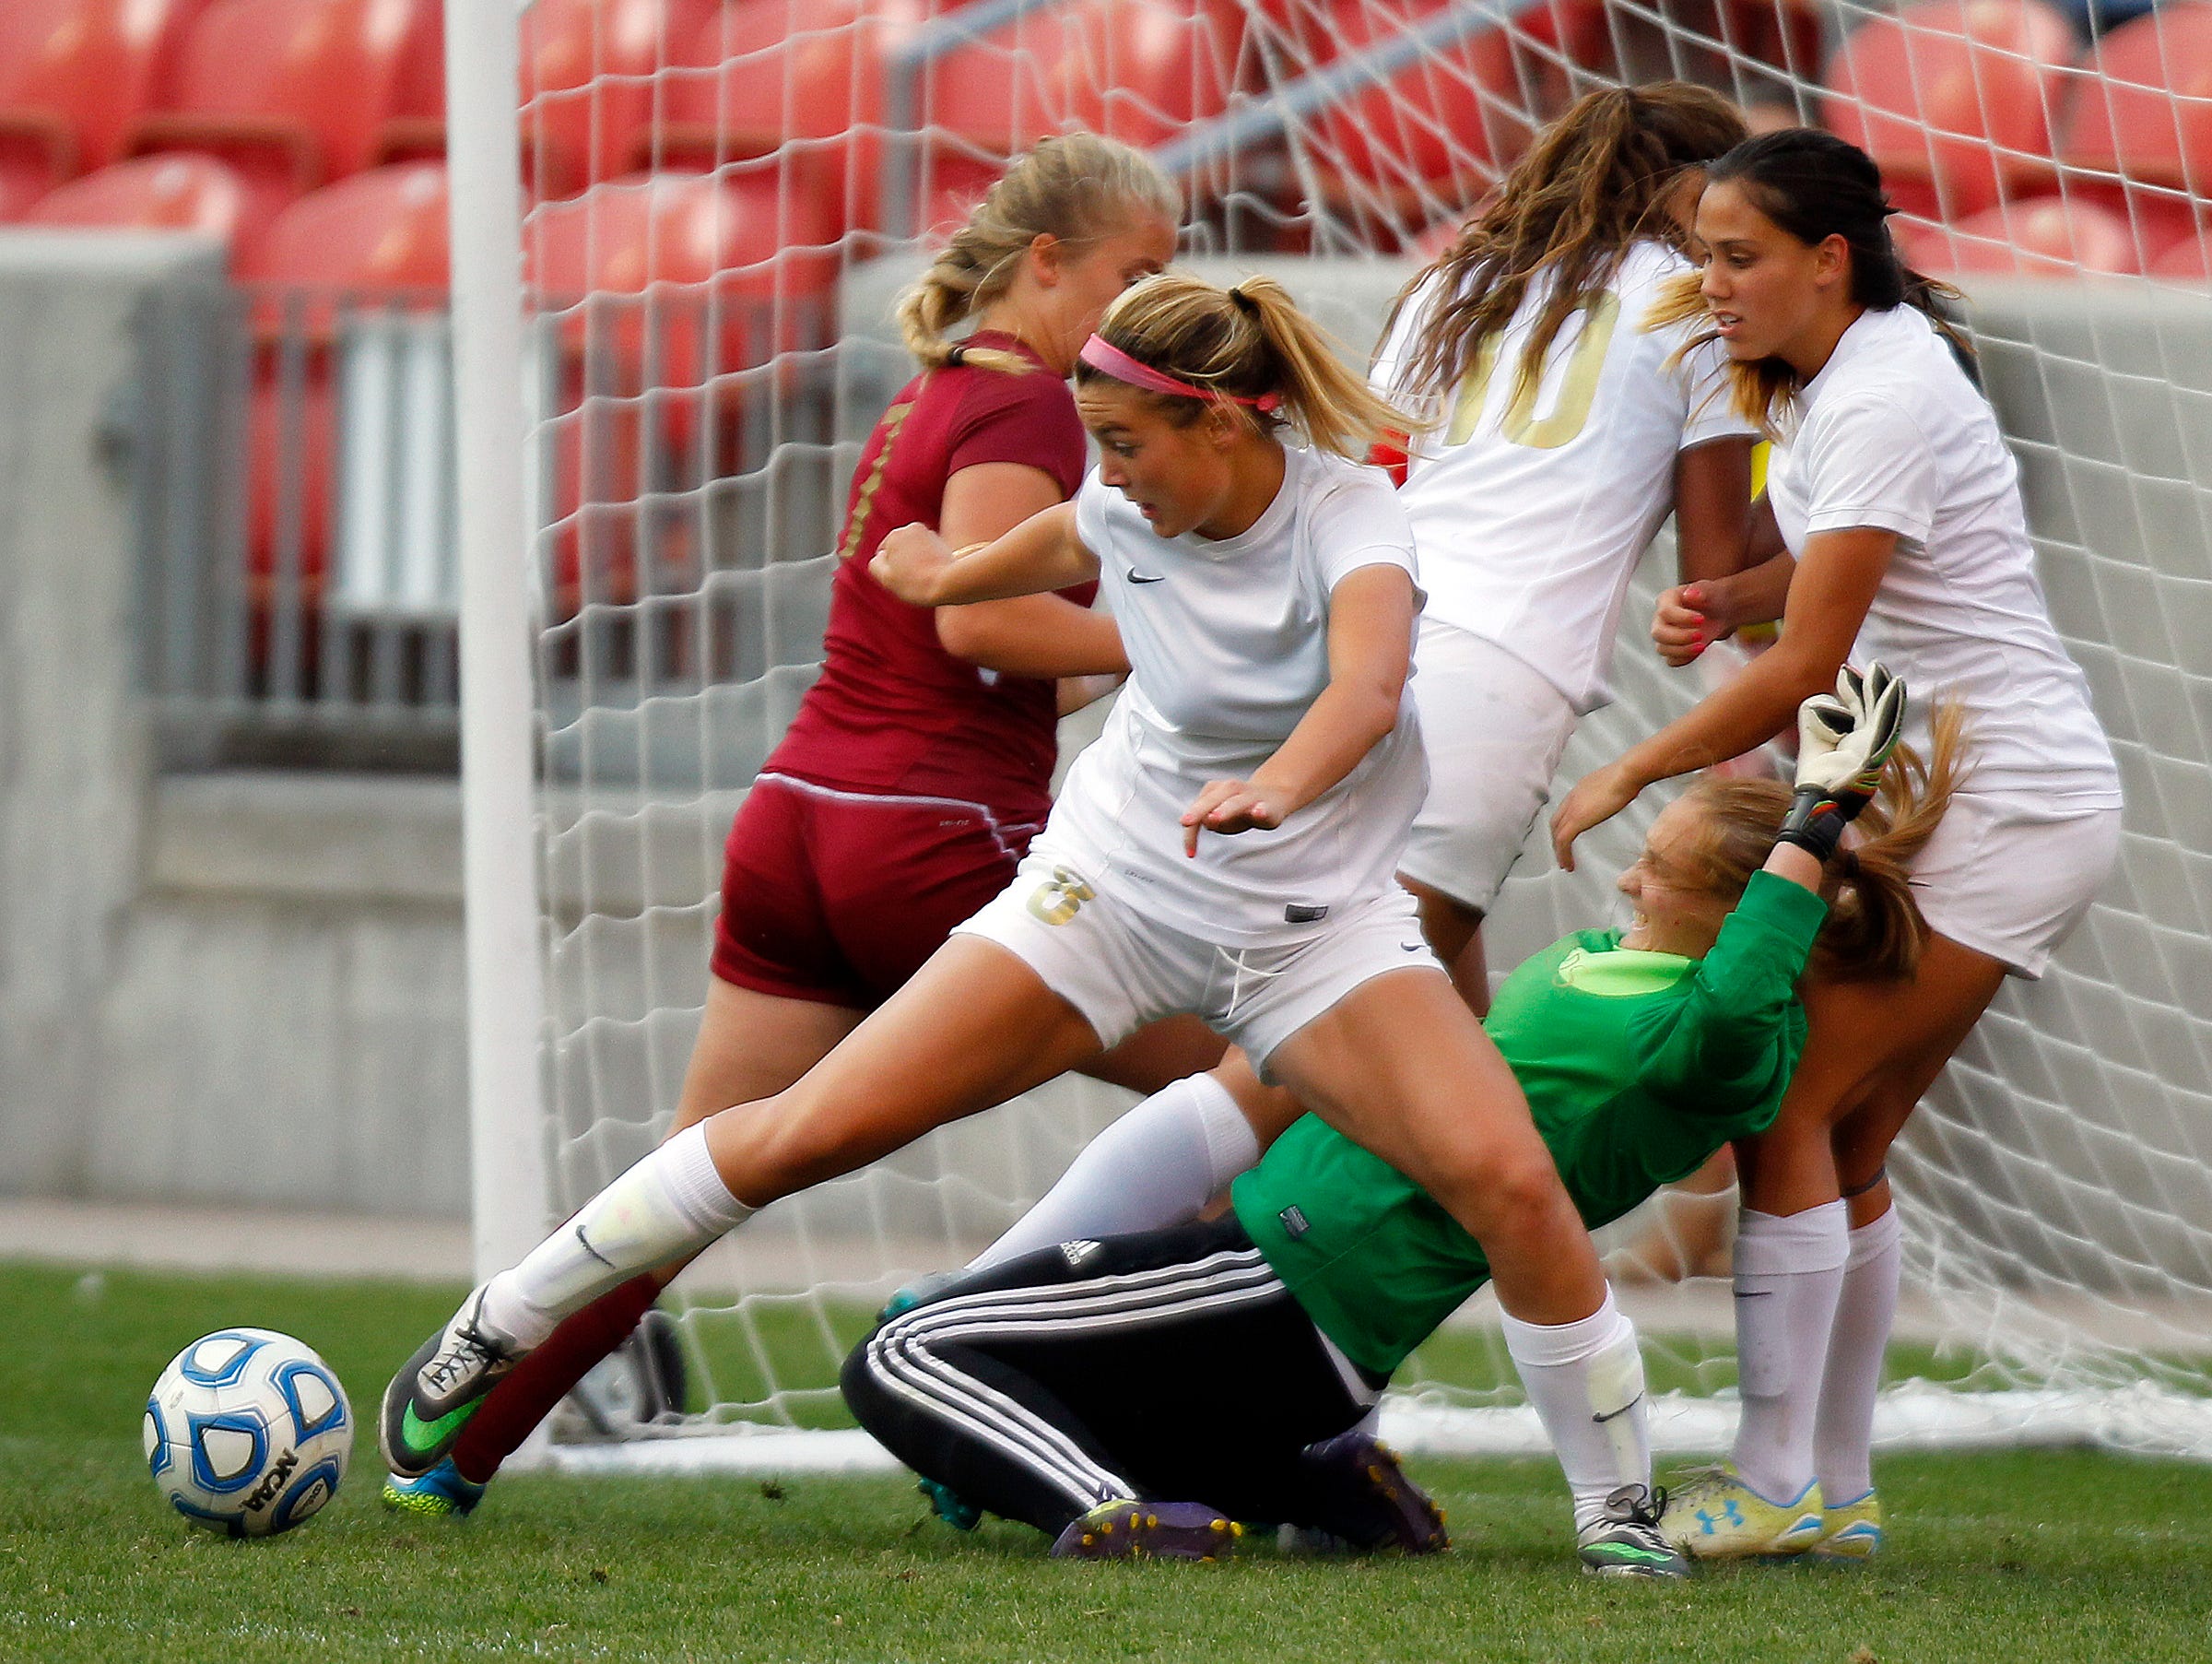 Logan and Cedar fight to control the ball in front of the Cedar goal in the 3A girls high school soccer championship at Rio Tinto Stadium on Saturday.